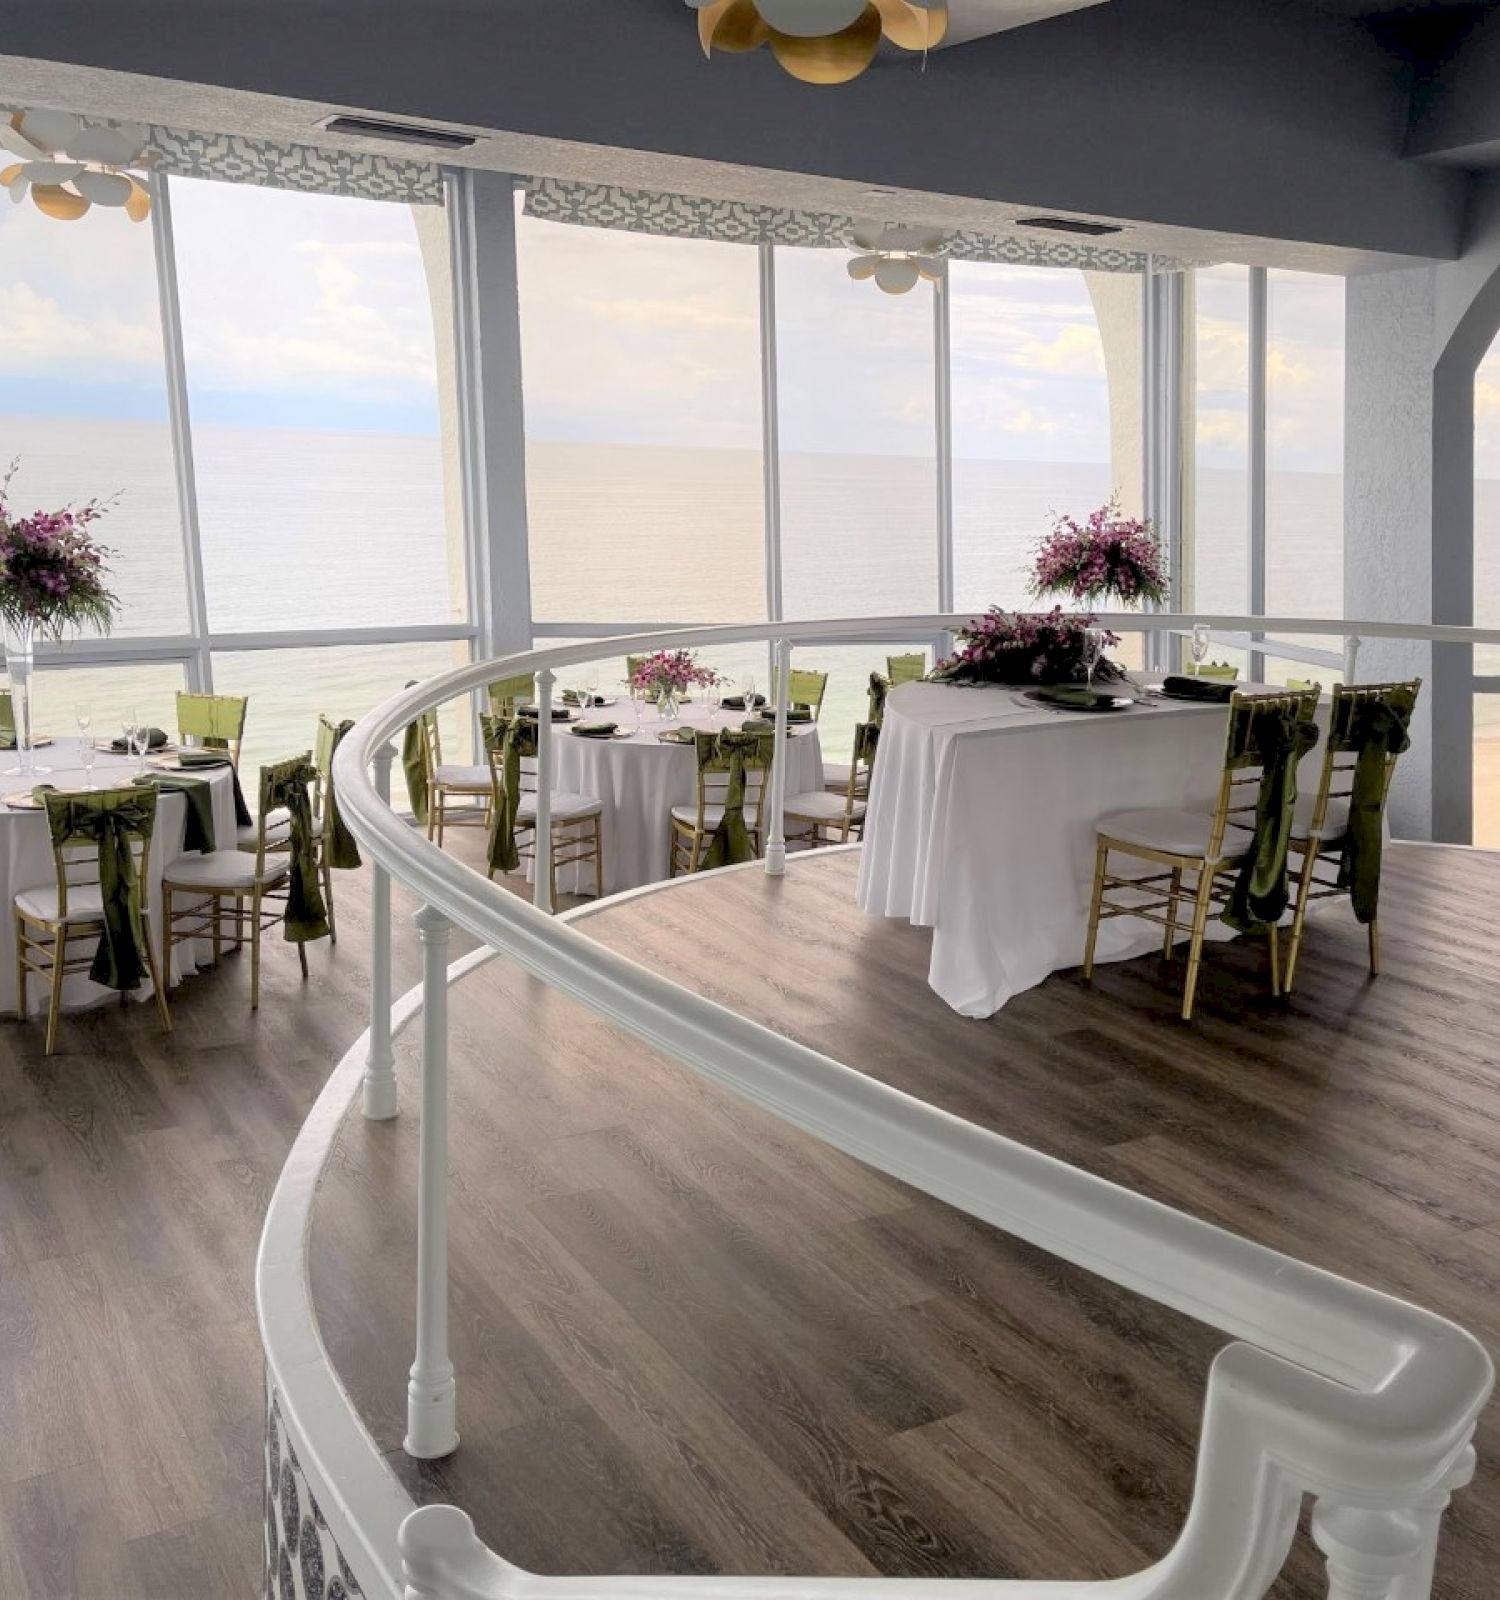 A beautifully decorated dining area overlooking the ocean, featuring tables with flower centerpieces and a curved staircase.